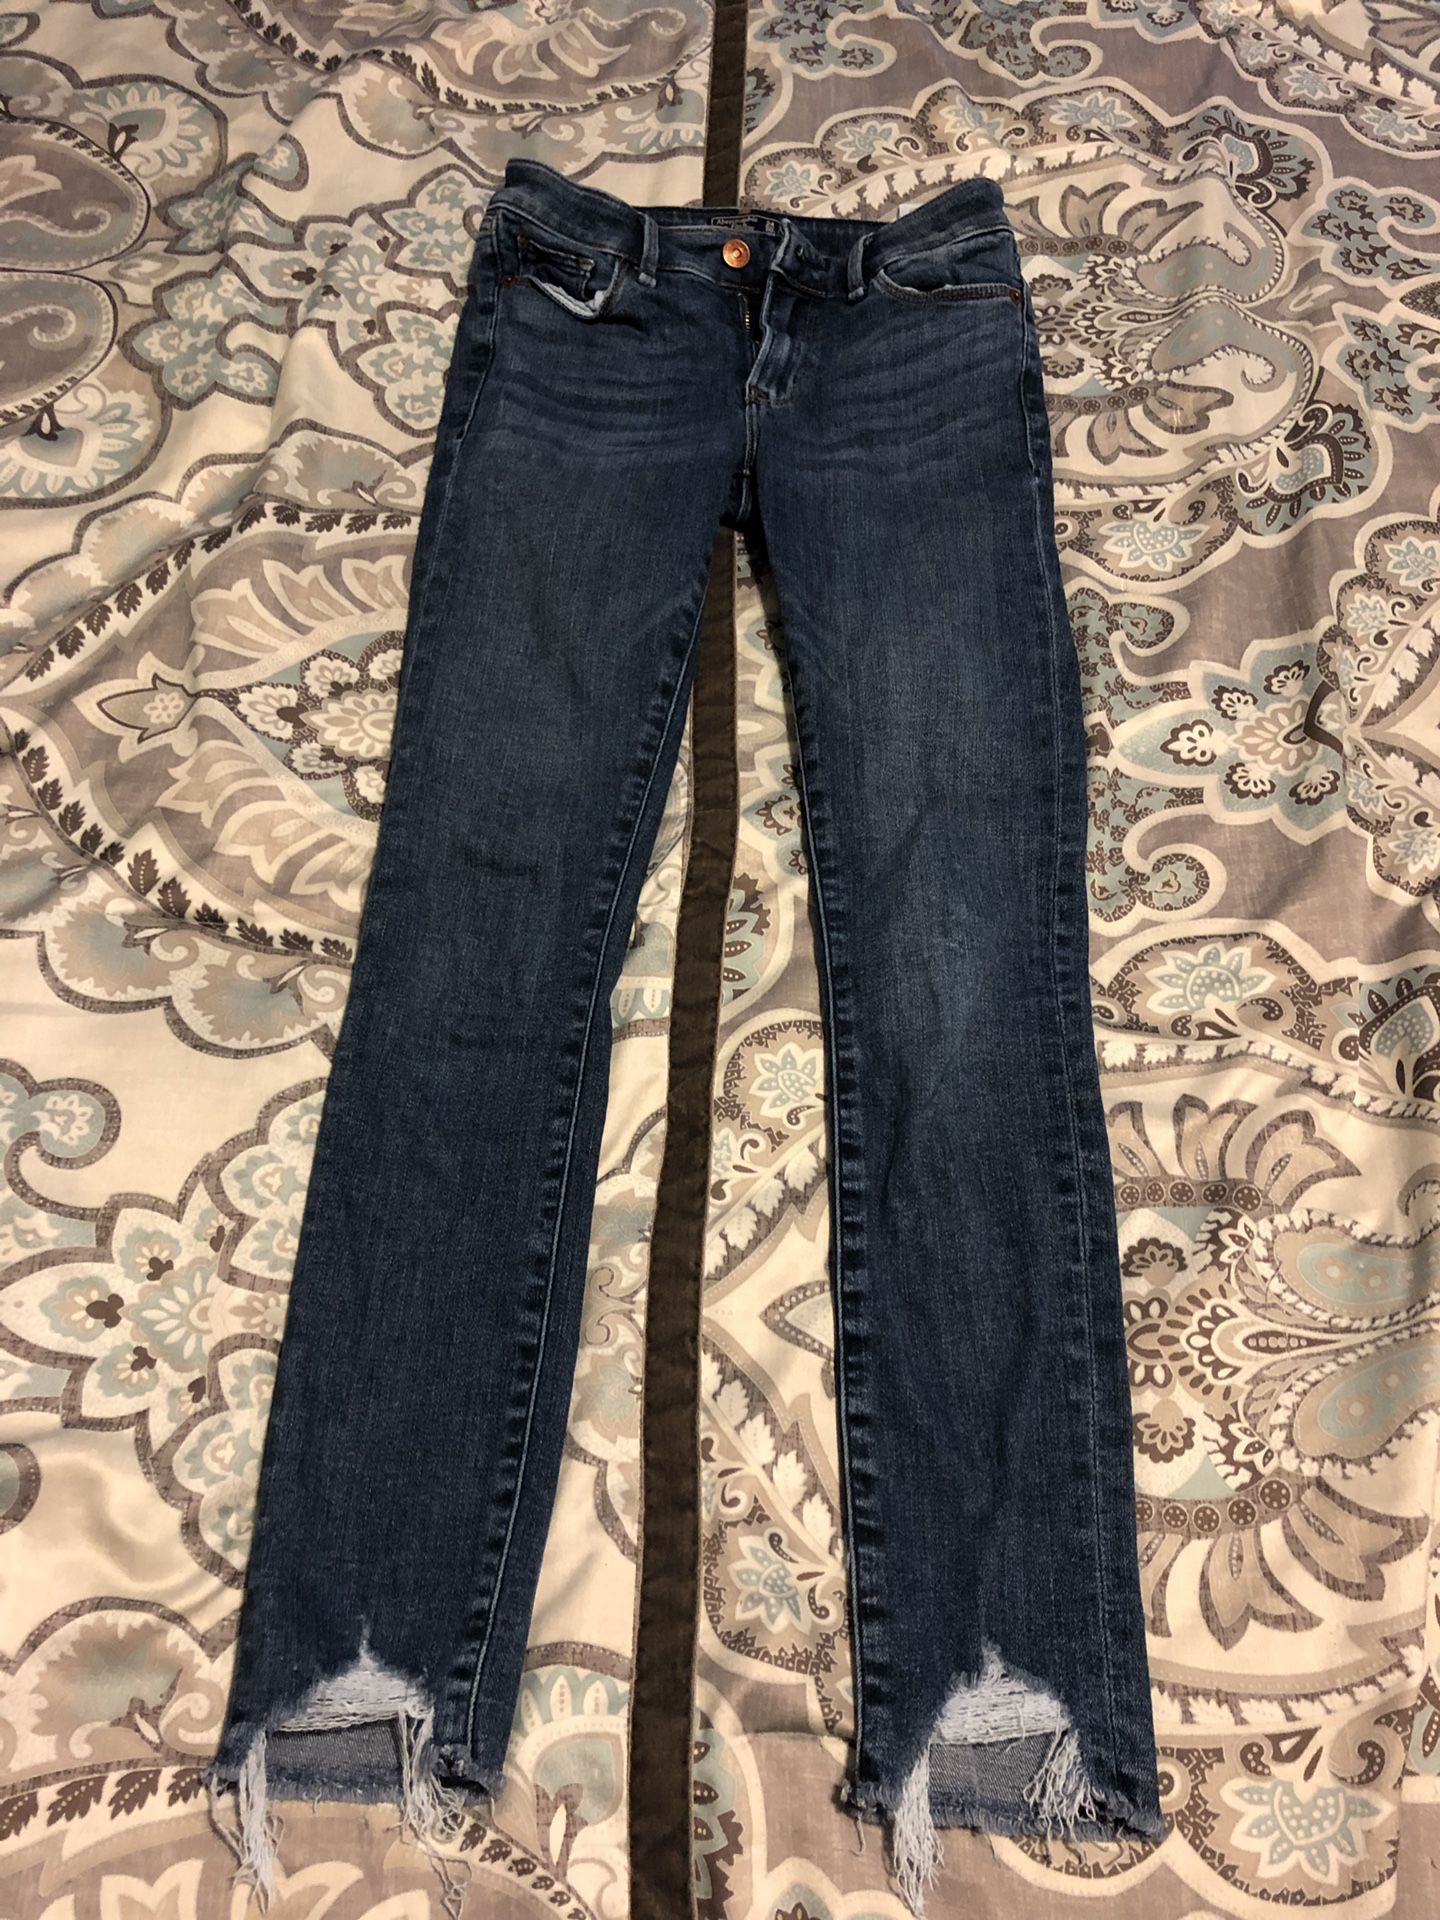 Women’s - size OO (24) jeans - Abercrombie & Fitch